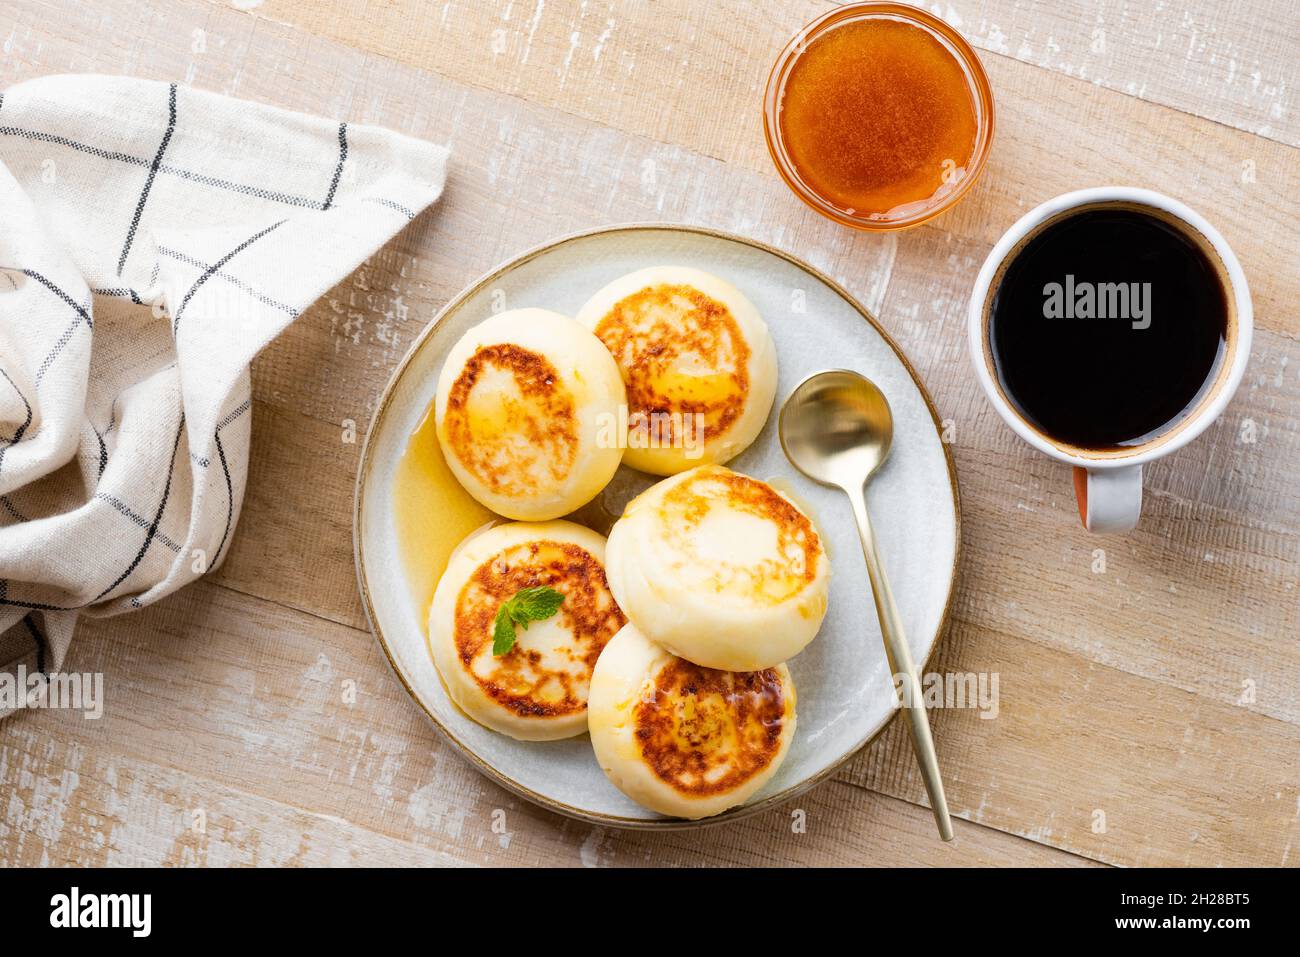 Fried cottage cheese pancakes, fritters or syrniki on a wooden table served with honey and cup of black coffee, top view. Ukrainian, Russian food Stock Photo